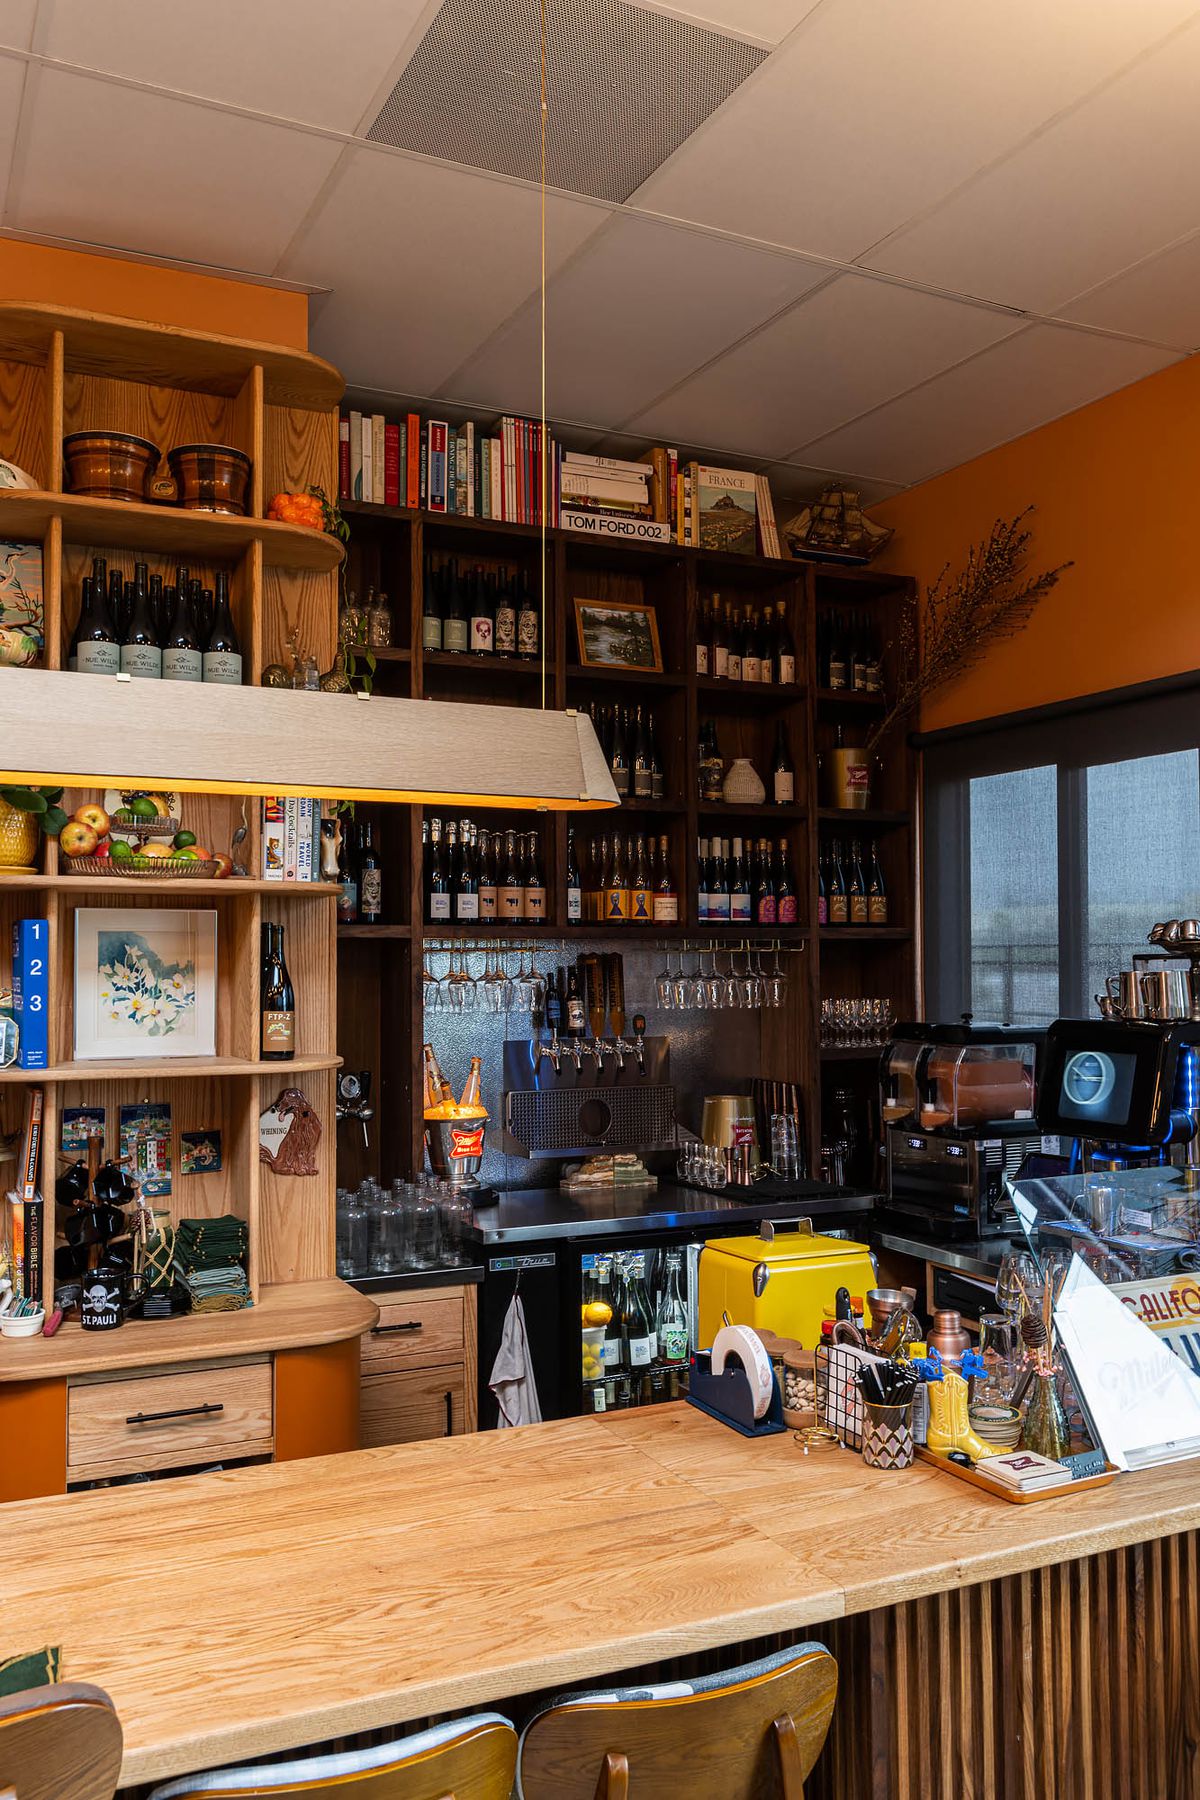 A service corner at a restaurant with tall bottles of wine on shelves, cookbooks, and small decor items.